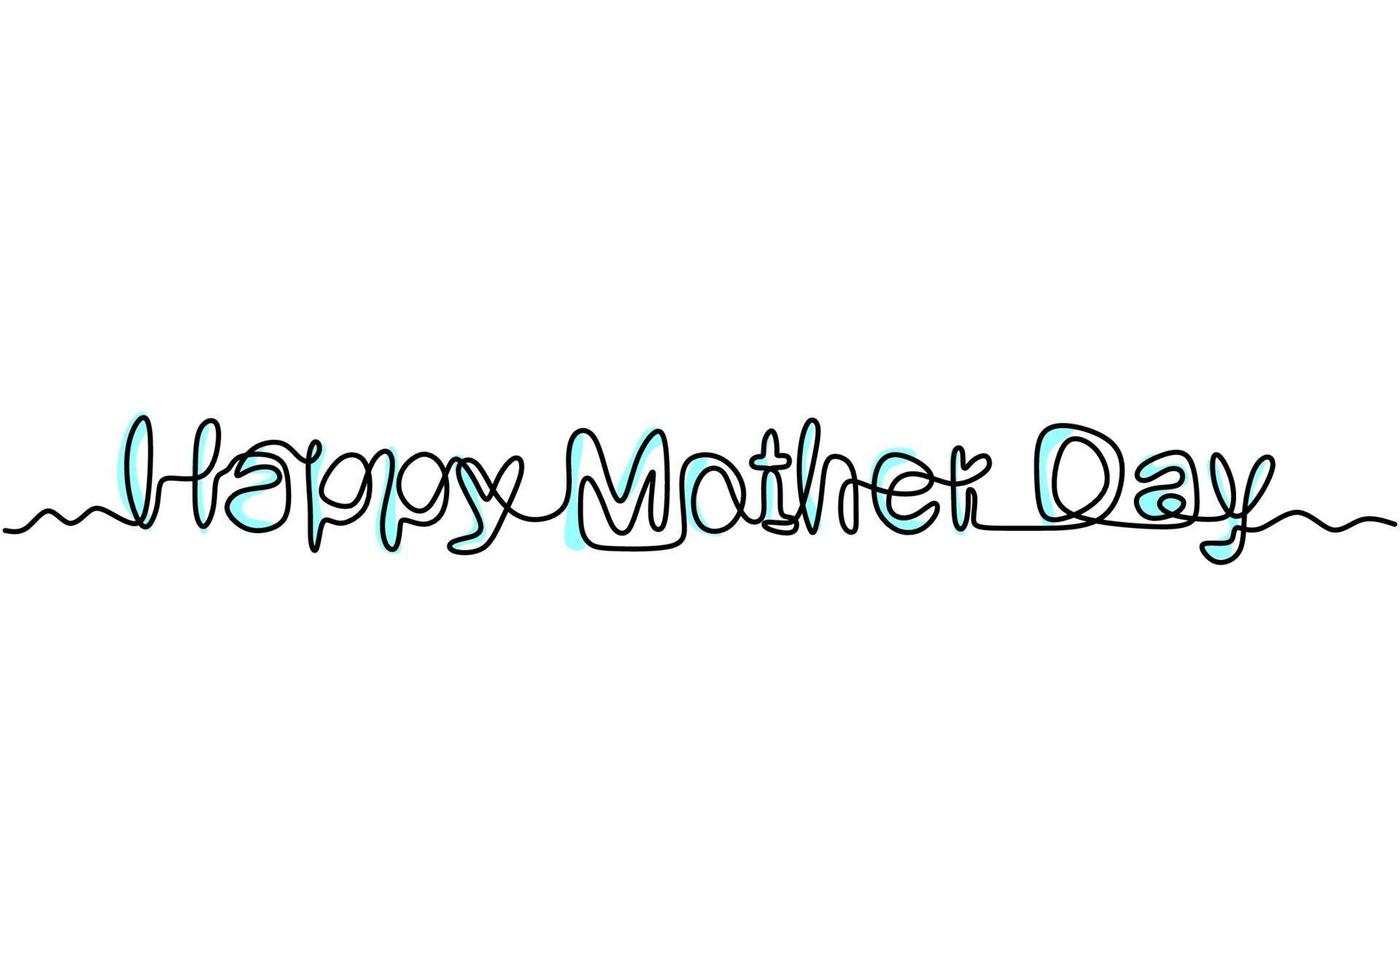 Happy Mother's Day handwritten lettering. Continuous line drawing text design isolated on white background. Vector illustration in flat style for Mother's day holiday minimalist style